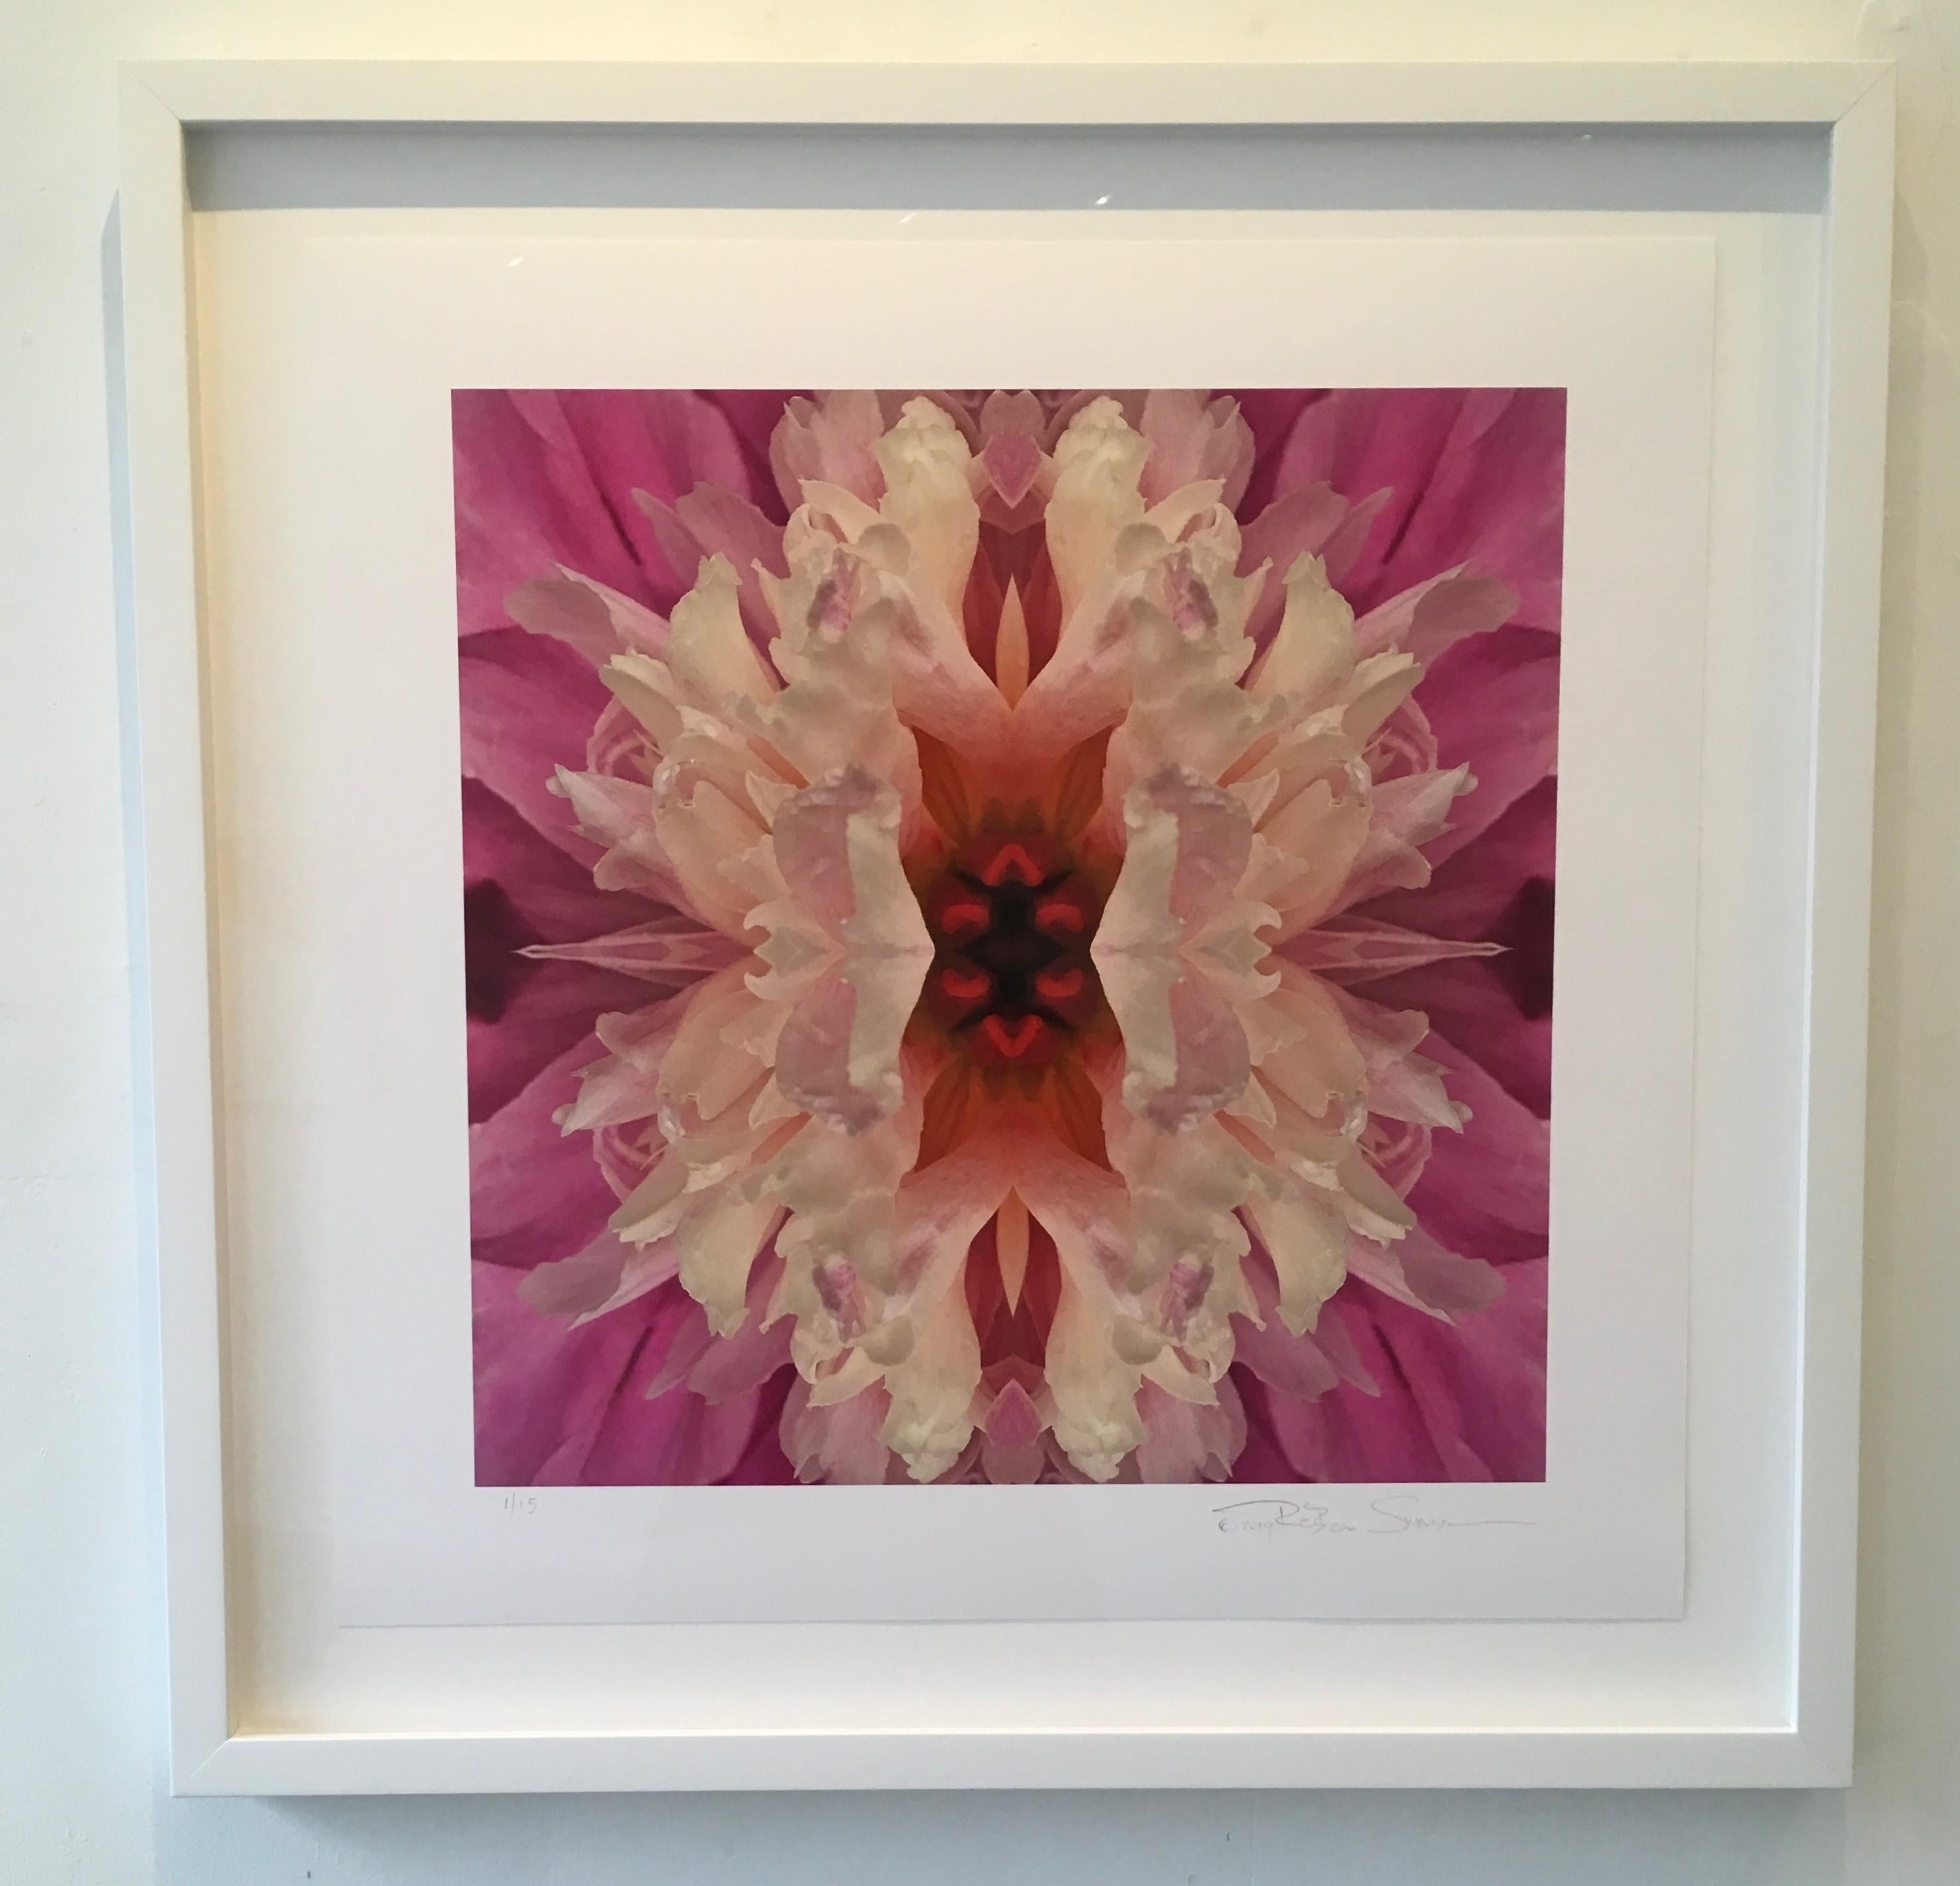 Rebecca Swanson, Eye of the Iris III, Limited Edition Photograph, 15x15.  It is available with Plexifacemount or white frame as shown.  This stunning image is filled purples and a touch of green, yellow and brown.  This is an edition of 15.  Also